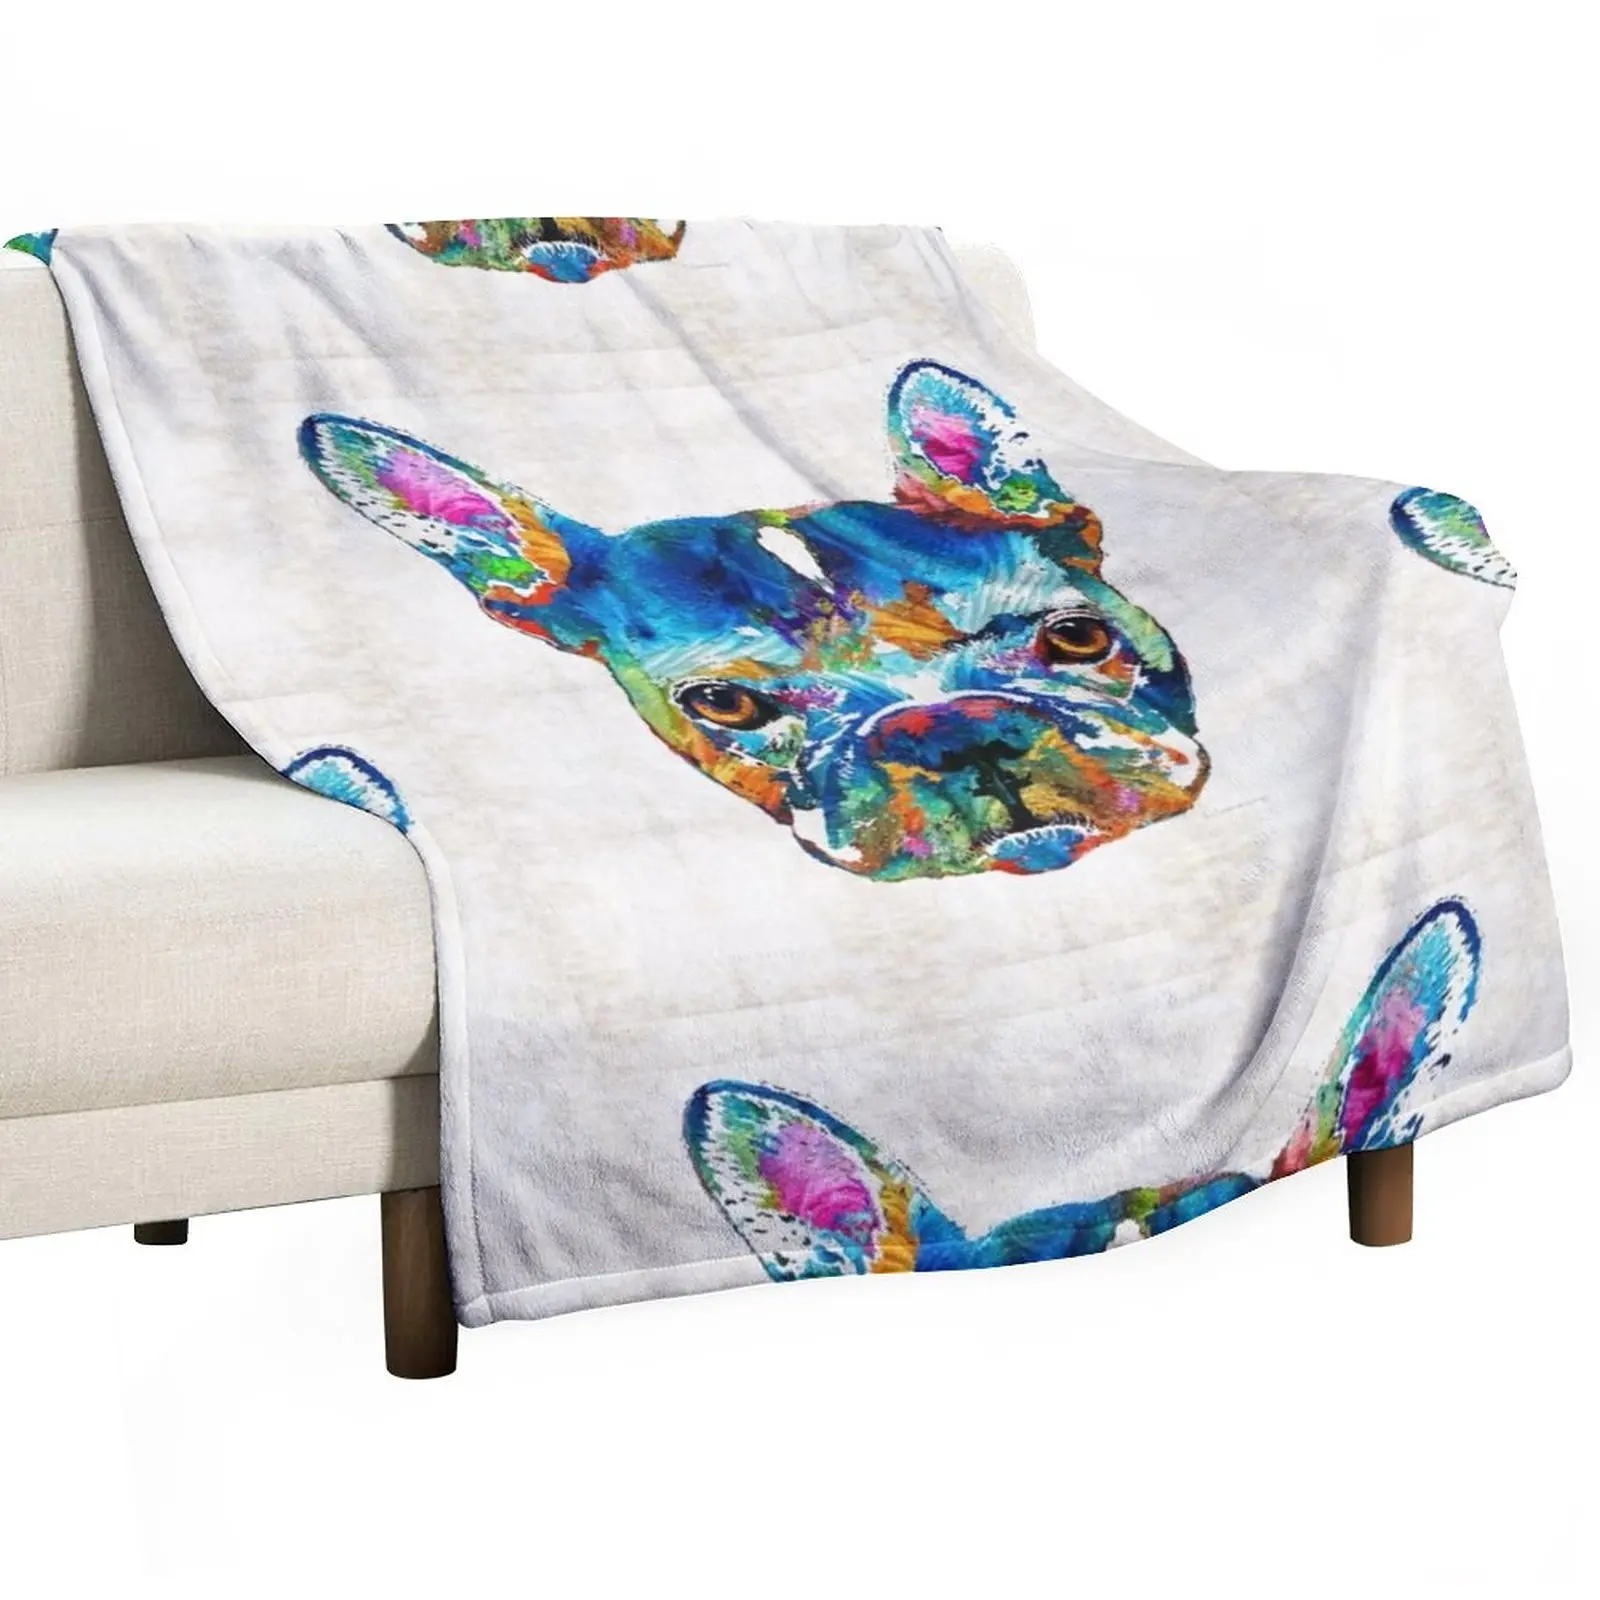 

Colorful French Bulldog Dog Art By Sharon Cummings Throw Blanket Thermals For Travel Polar Decorative Beds Blankets